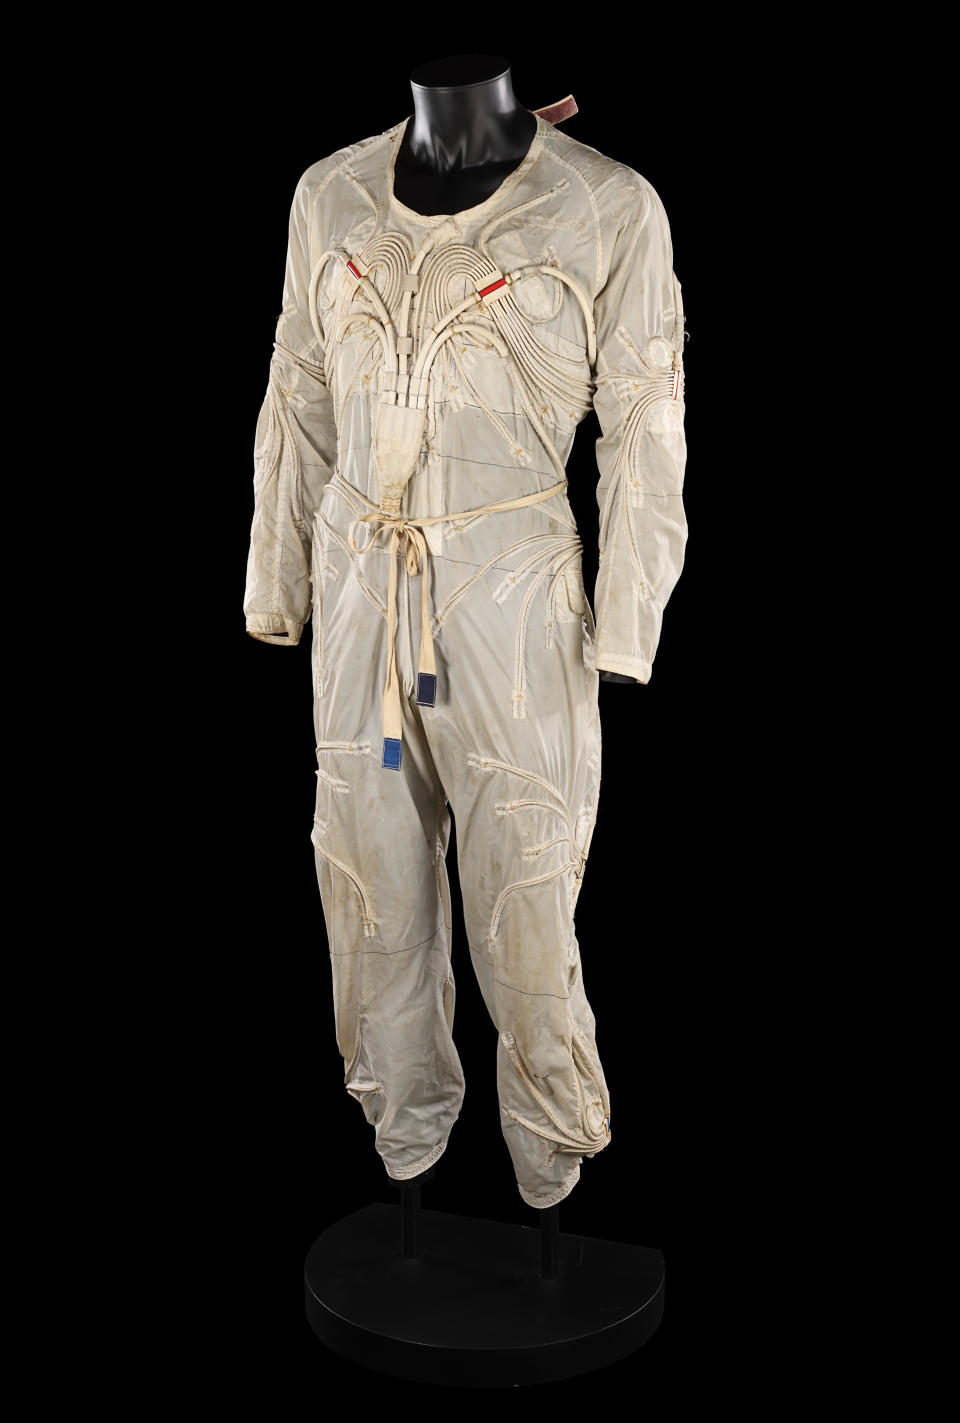 David Bowie’s Major Tom spacesuit from the Ashes To Ashes music video (Propstore/PA)